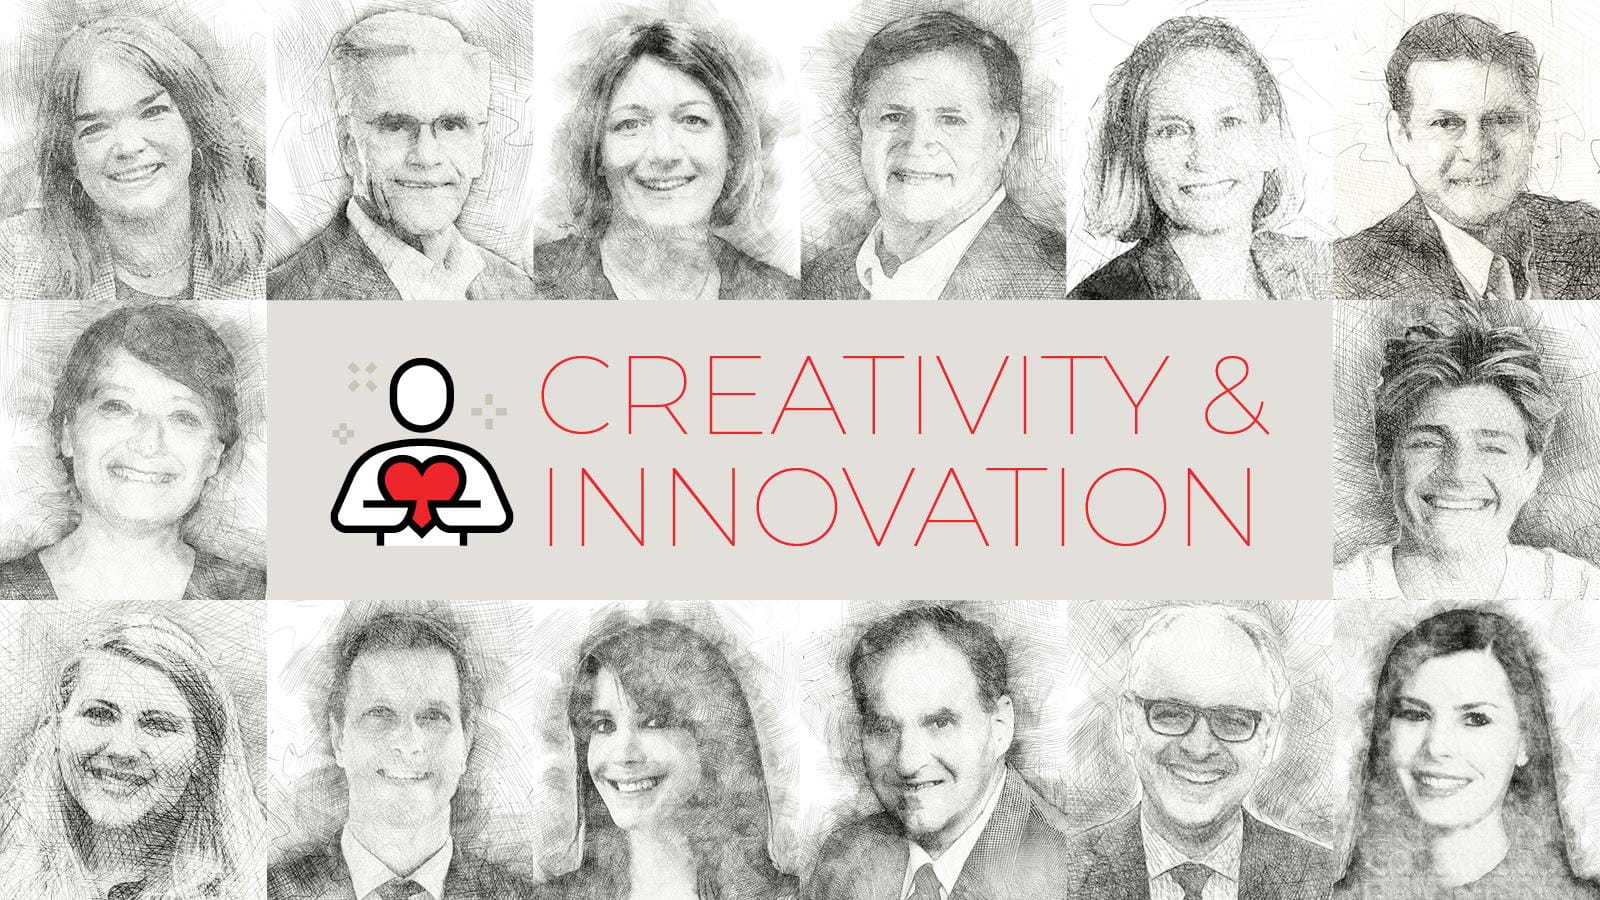 Creativity & Innovation collage with sketch portraits of 14 leaders in patient advocacy